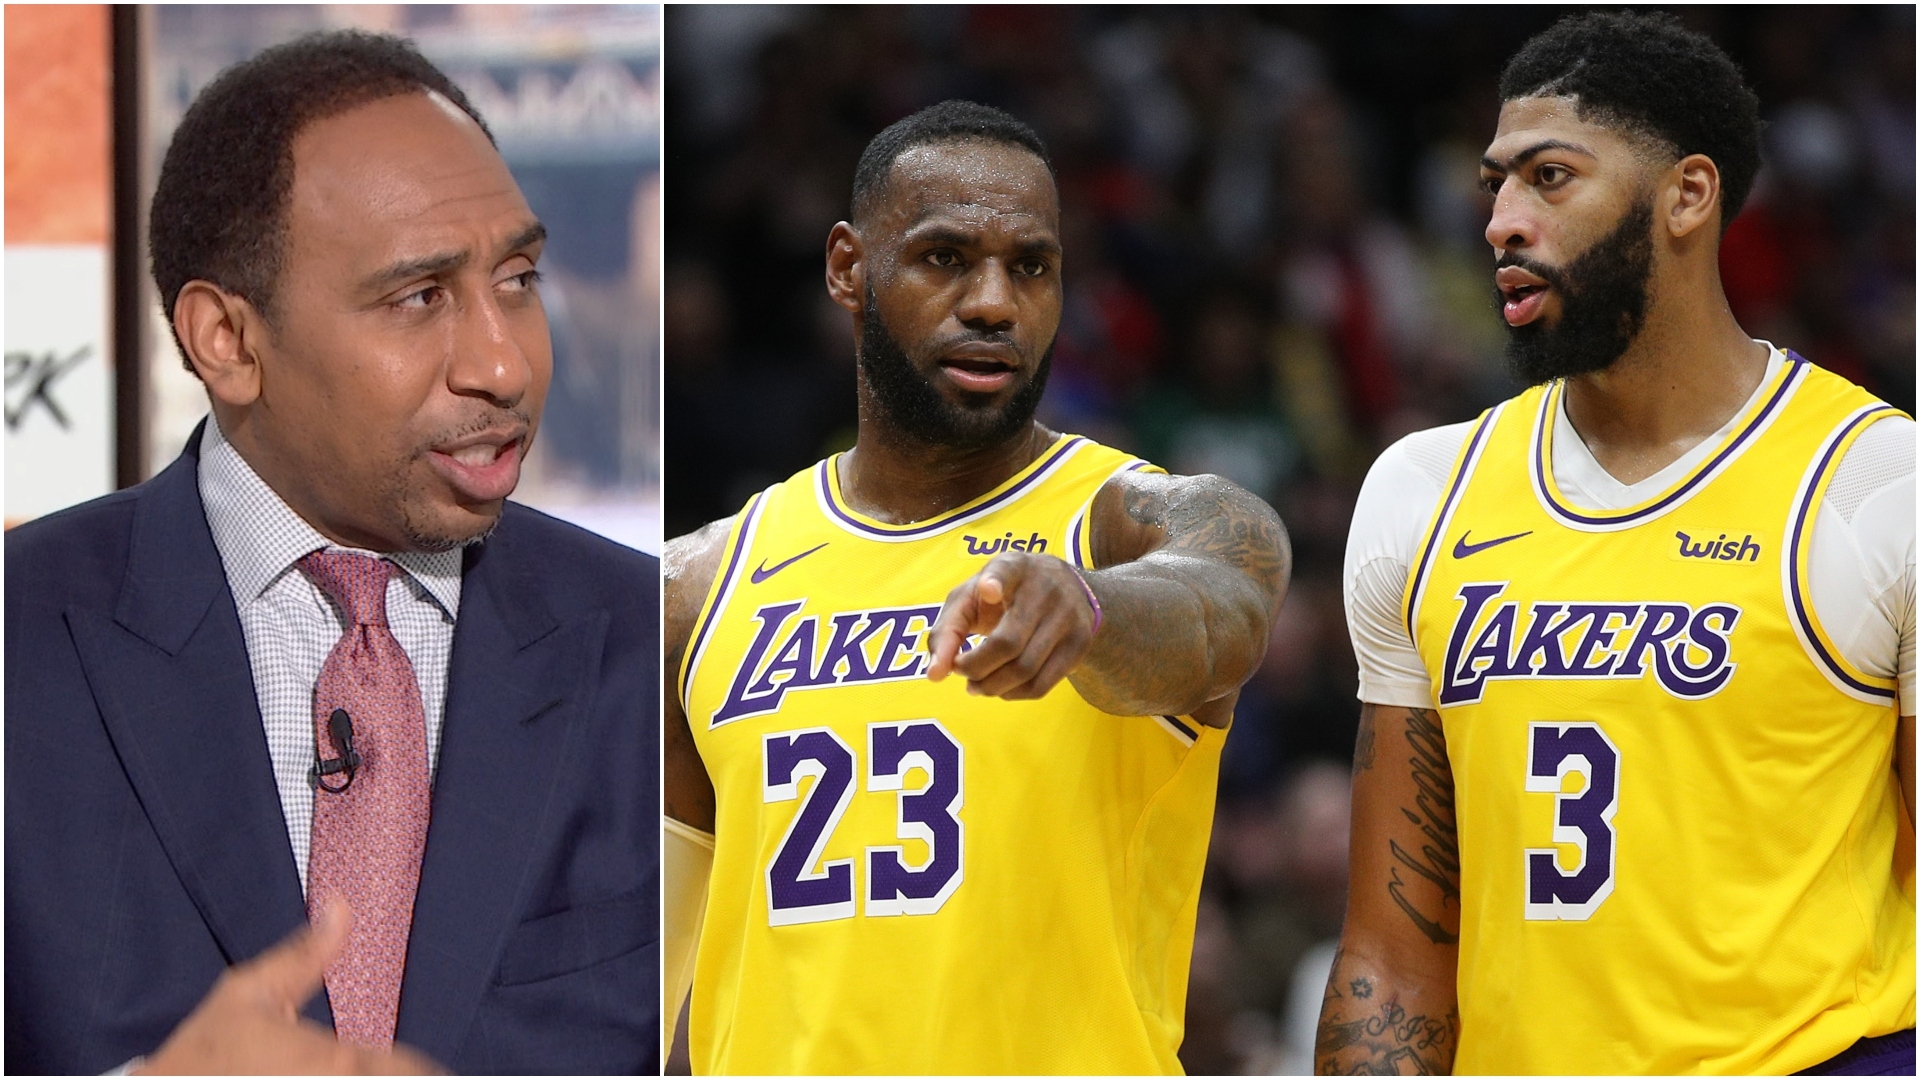 Stephen A. Lakers are the best team in the NBA - Stream the Video